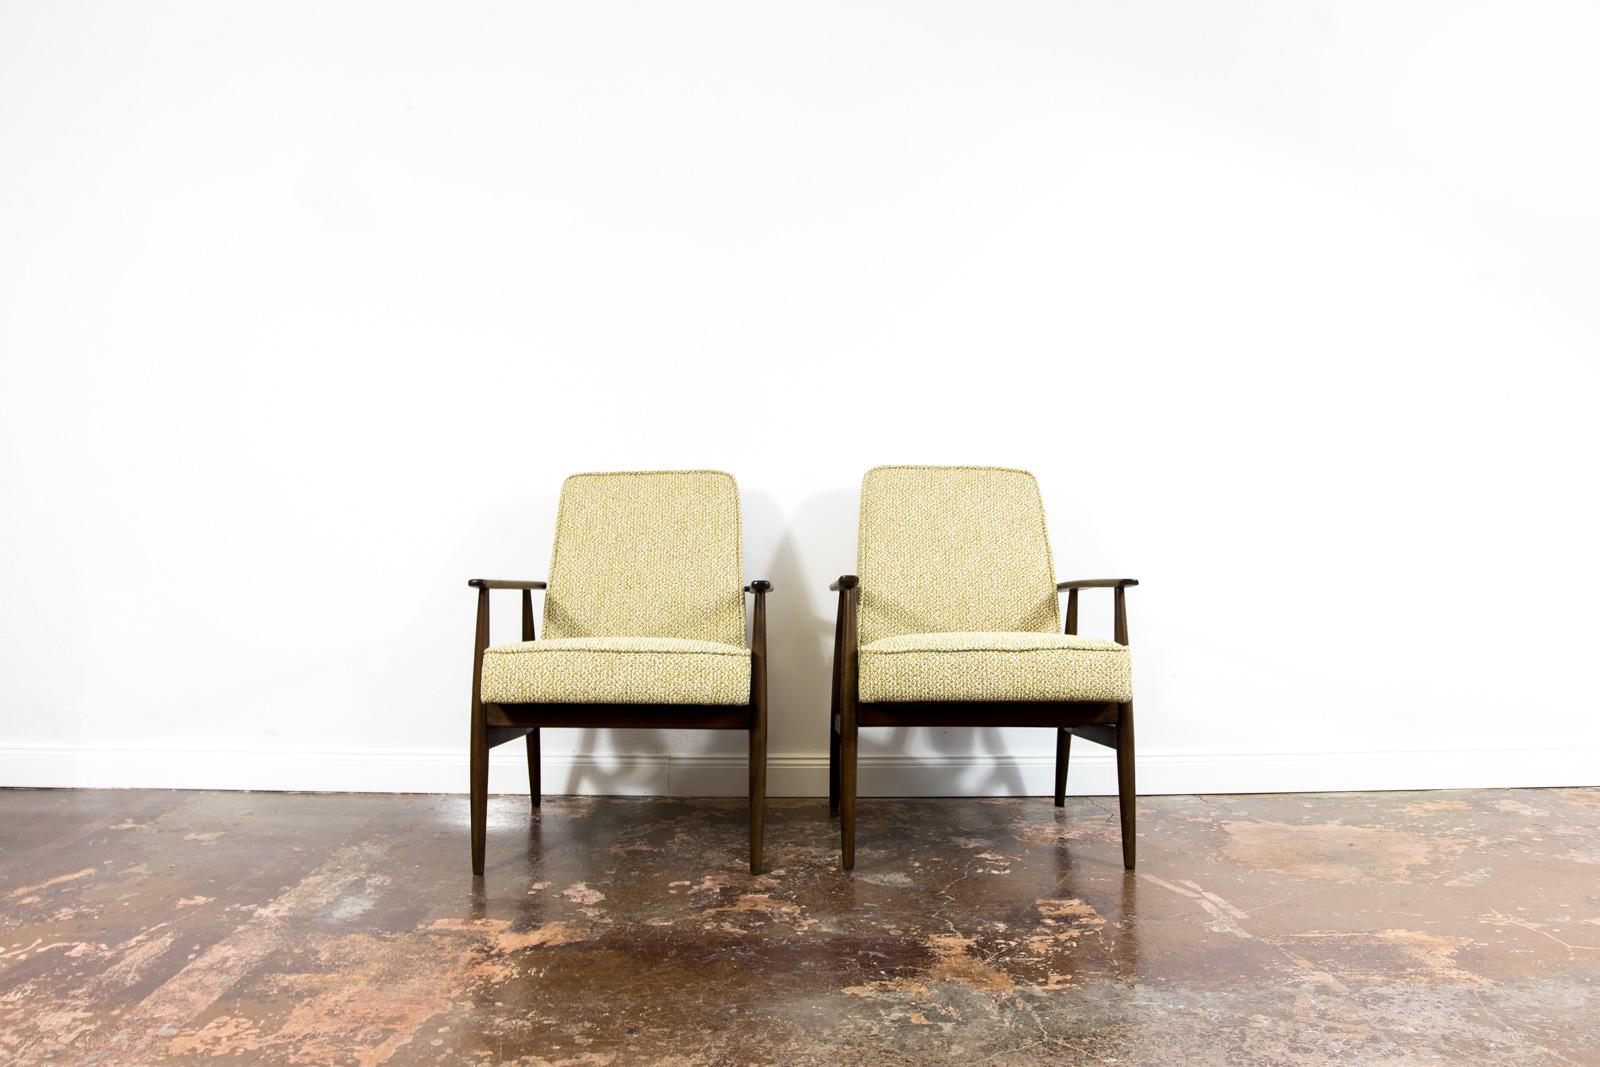 Pair of restored mid-century armchairs by H. Lis, 1960's

Pair of mid-century armchairs Type 300-190 designed by H. Lis, manufactured in Poland, 1960's.
Solid beech wood has been completely restored.
Reupholstered.